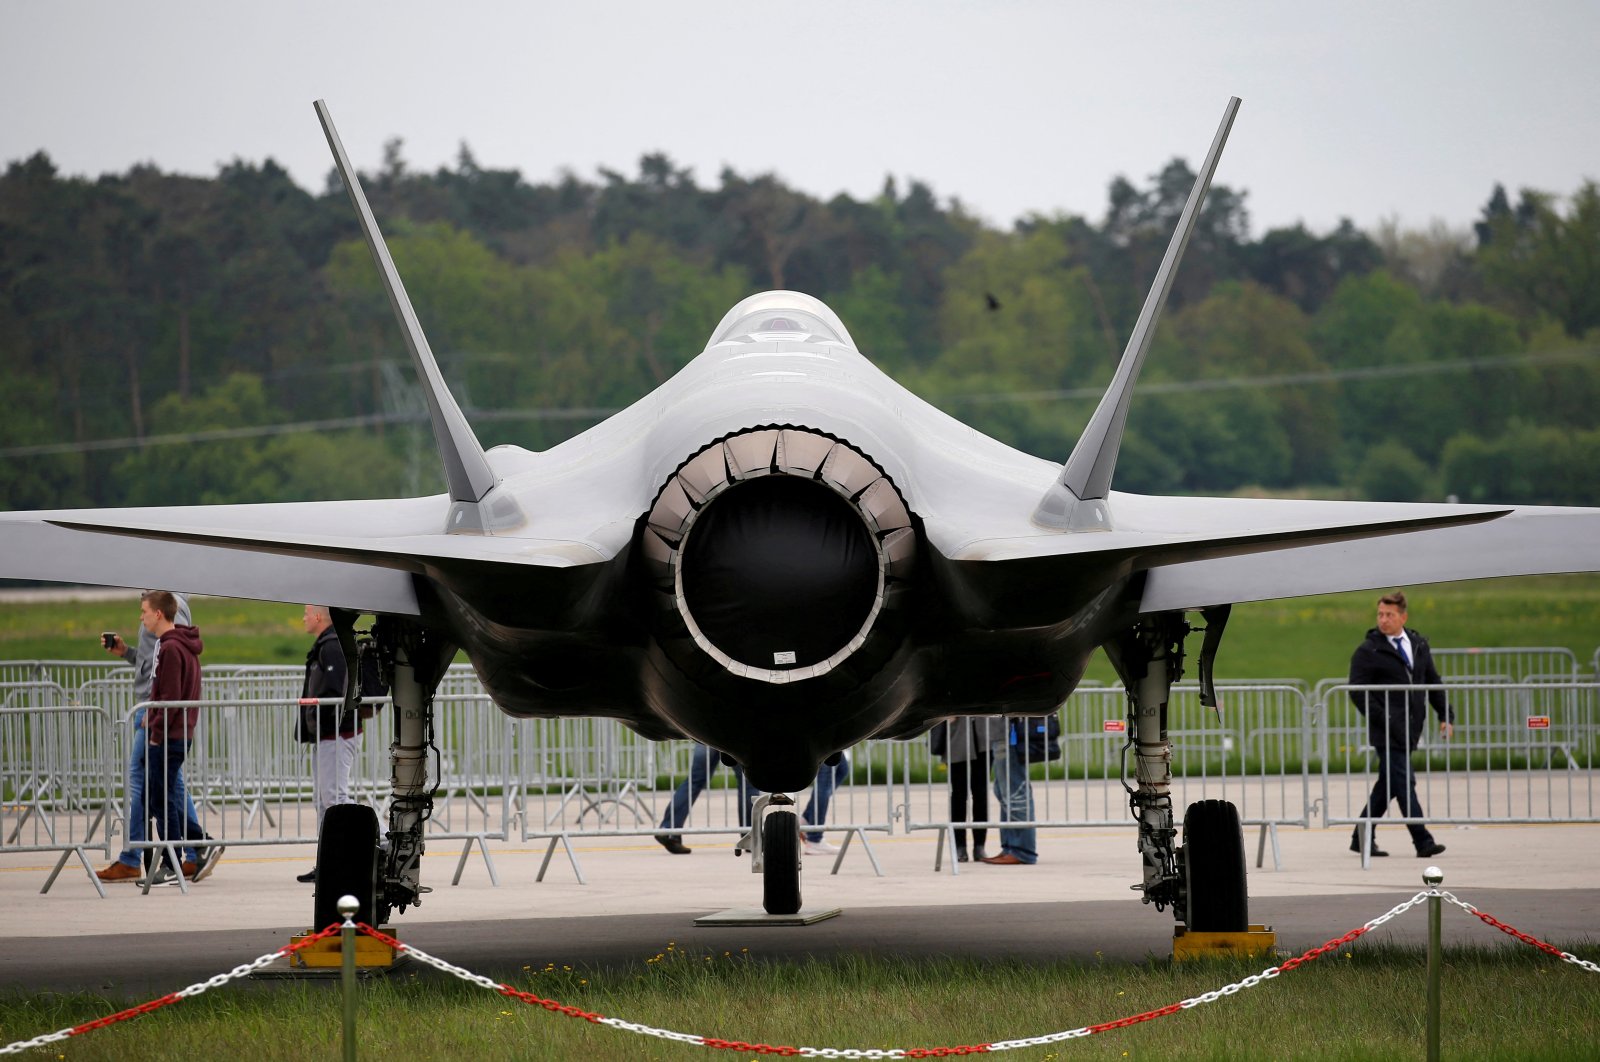 A Lockheed Martin F-35 aircraft is seen at the ILA Air Show in Berlin, Germany, April 25, 2018. (REUTERS Photo)